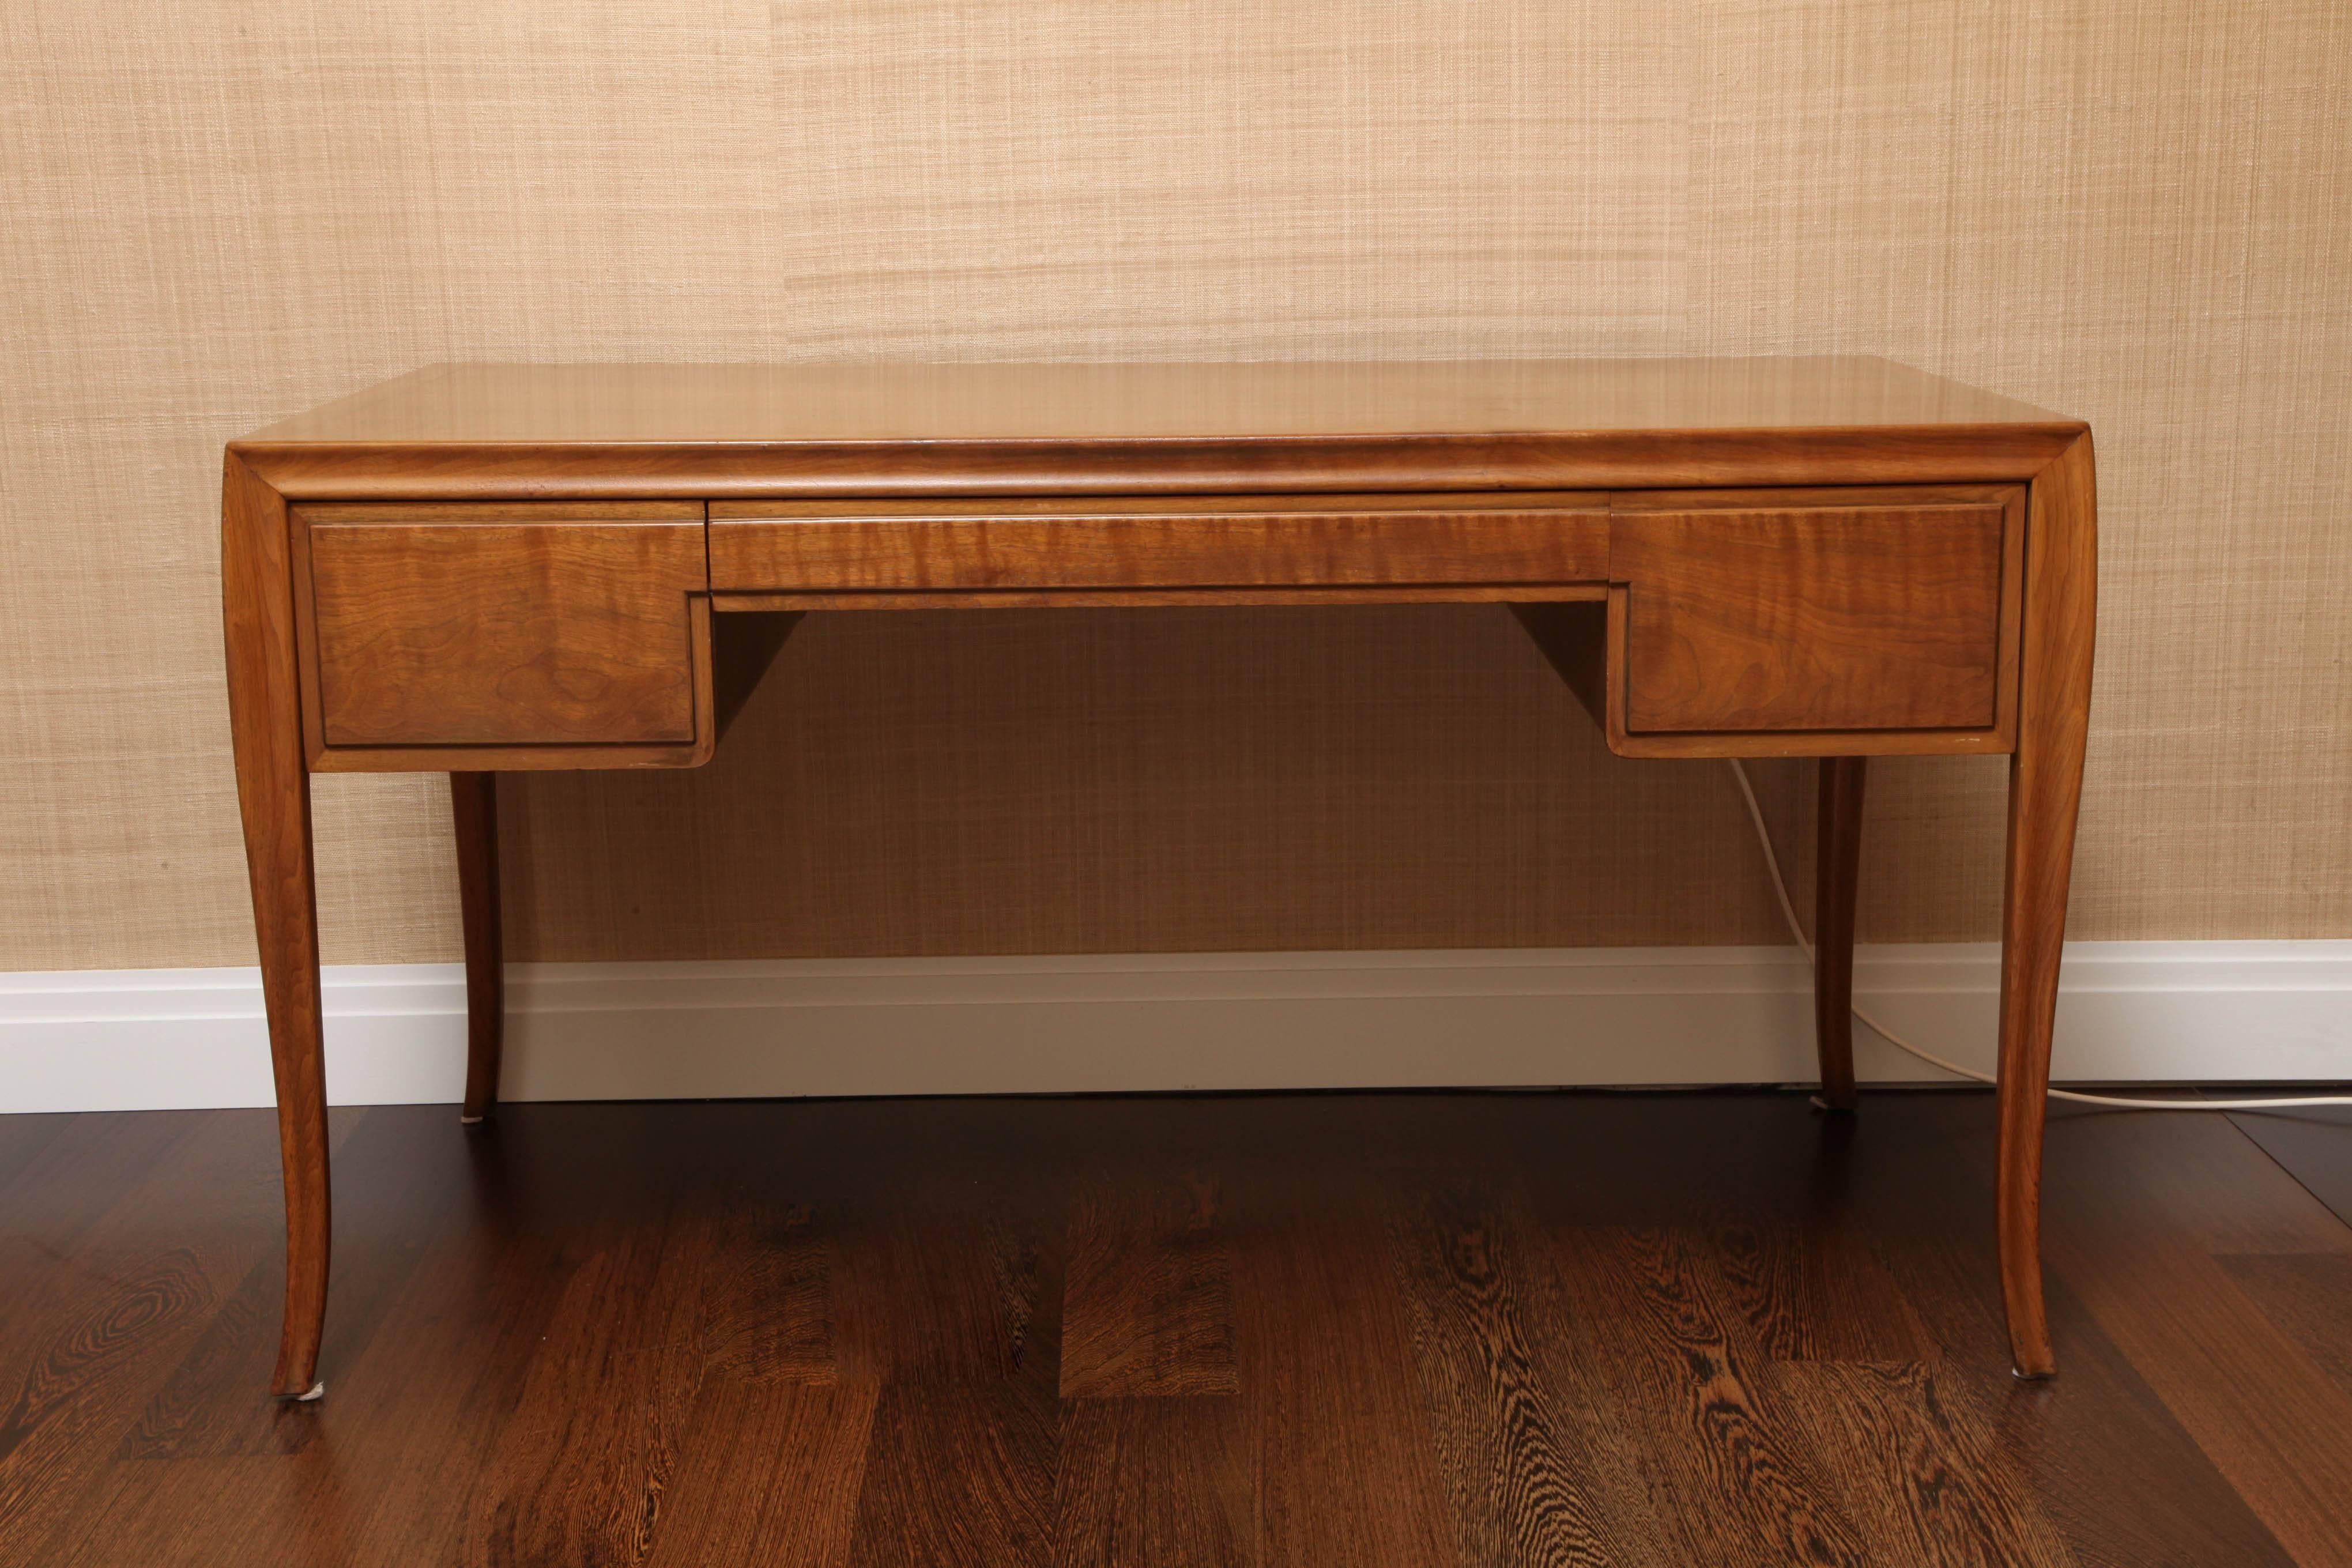 Gorgeous walnut desk designed in 1961 by the iconic T.H. Robsjohn-Gibbings (1905-1976) for Baker as part of a 32 piece collection. Robsjohn-Gibbings was heralded for his contemporary interpretations of the Classical style and this example is no